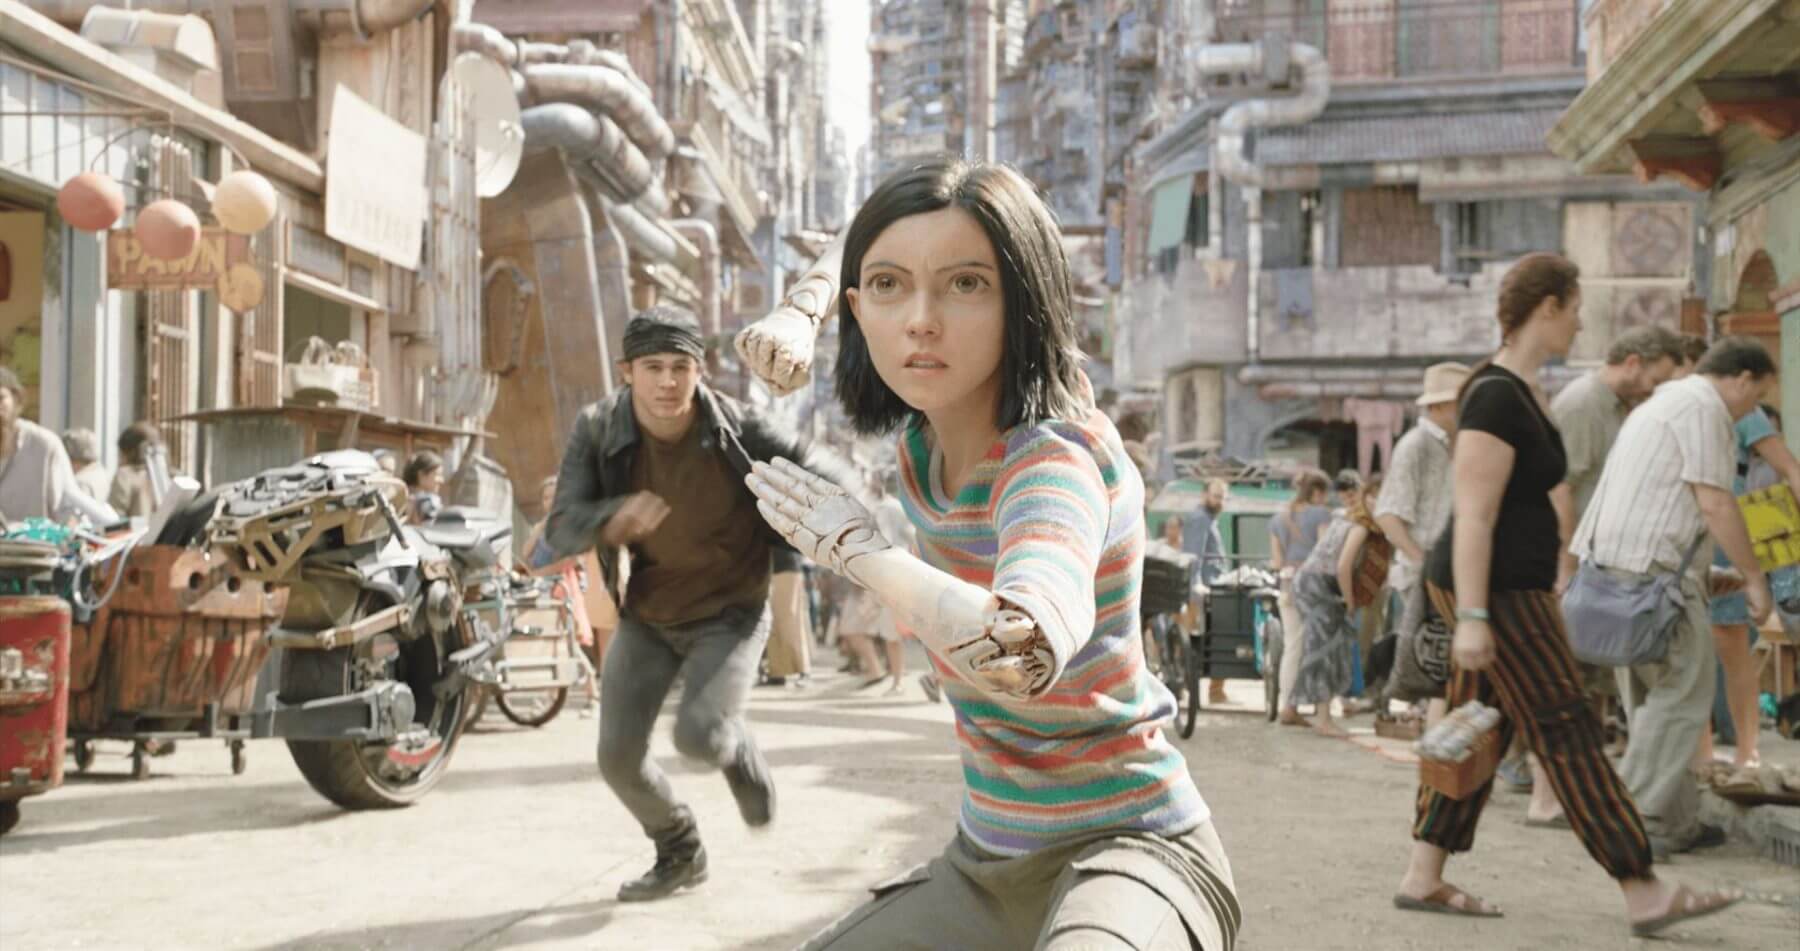 Alita fights while Hugo tries to stop her.